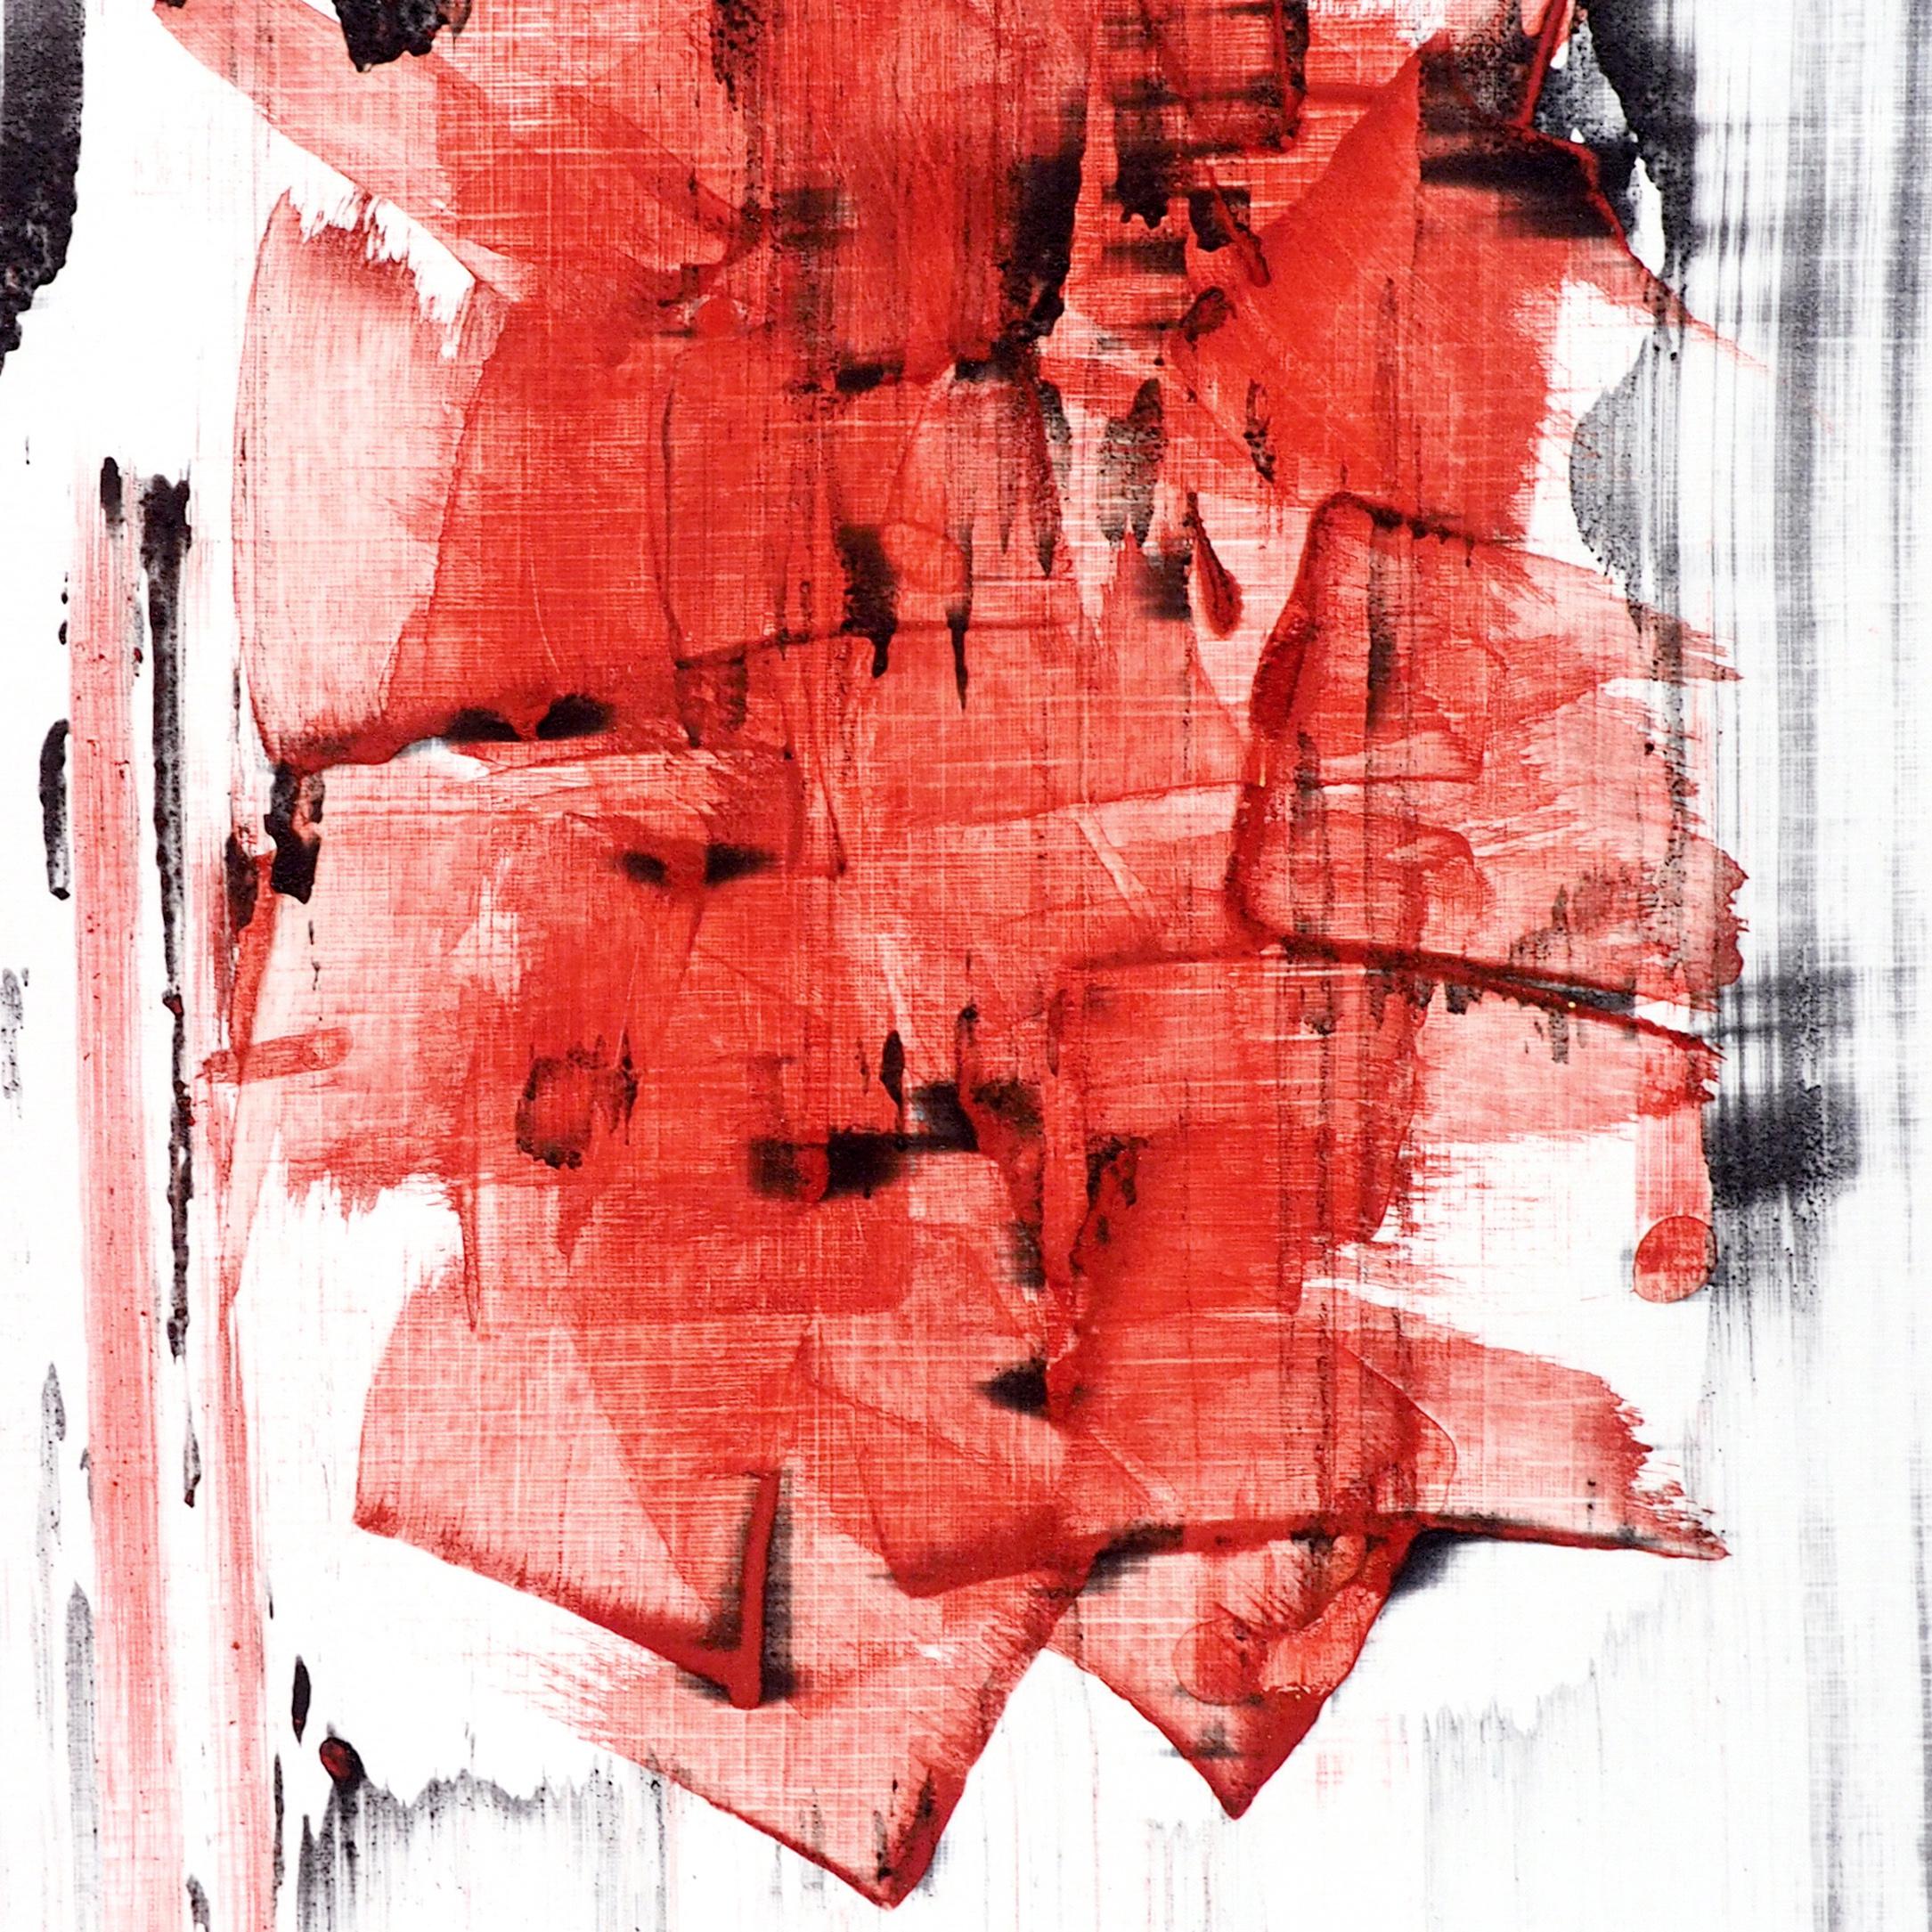 Mad red 2 (Abstract Painting) - Beige Abstract Drawing by Emma Godebska